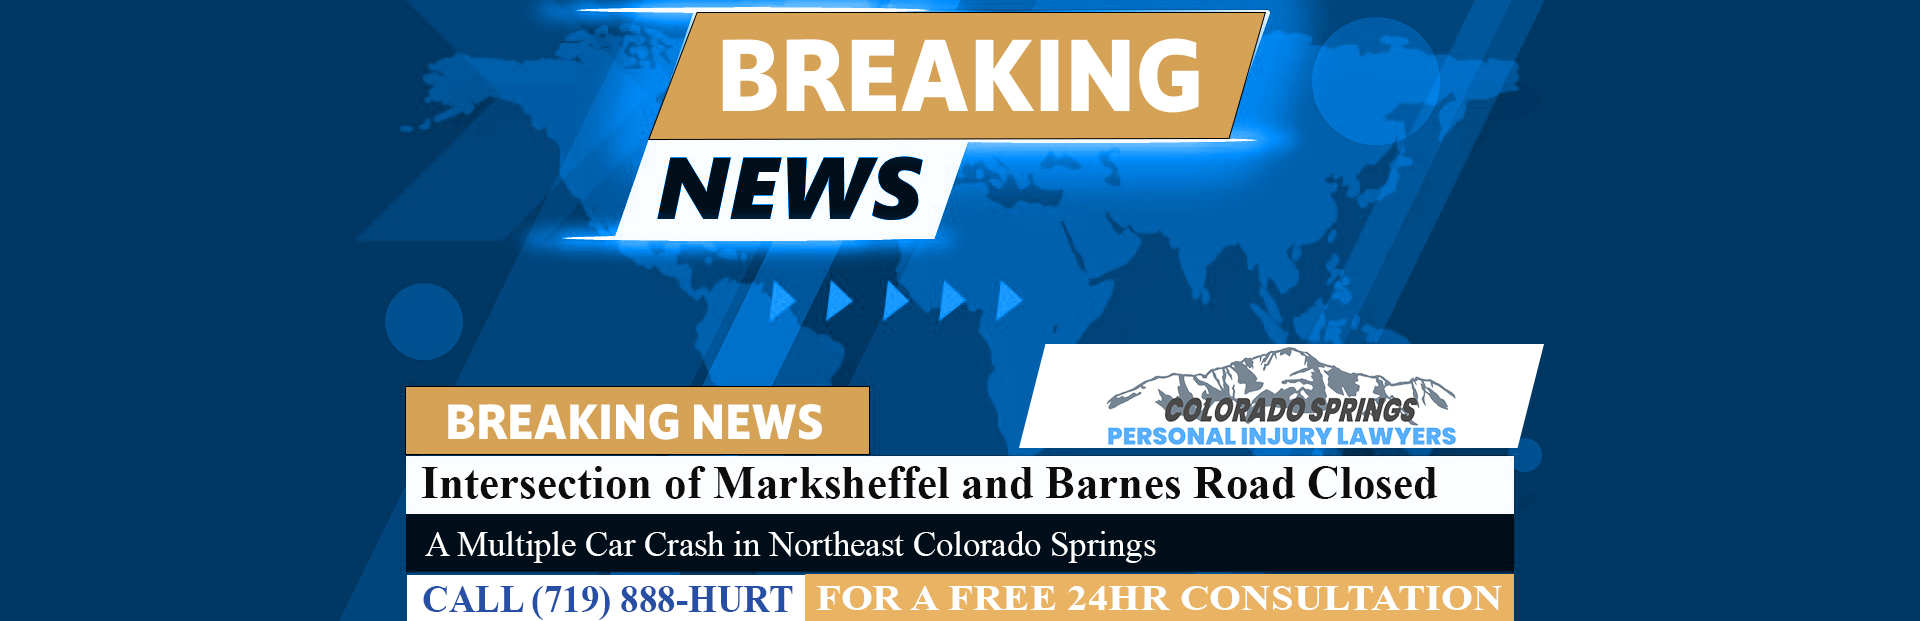 [09-18-23] Intersection of Marksheffel and Barnes Road Closed Due to Crash